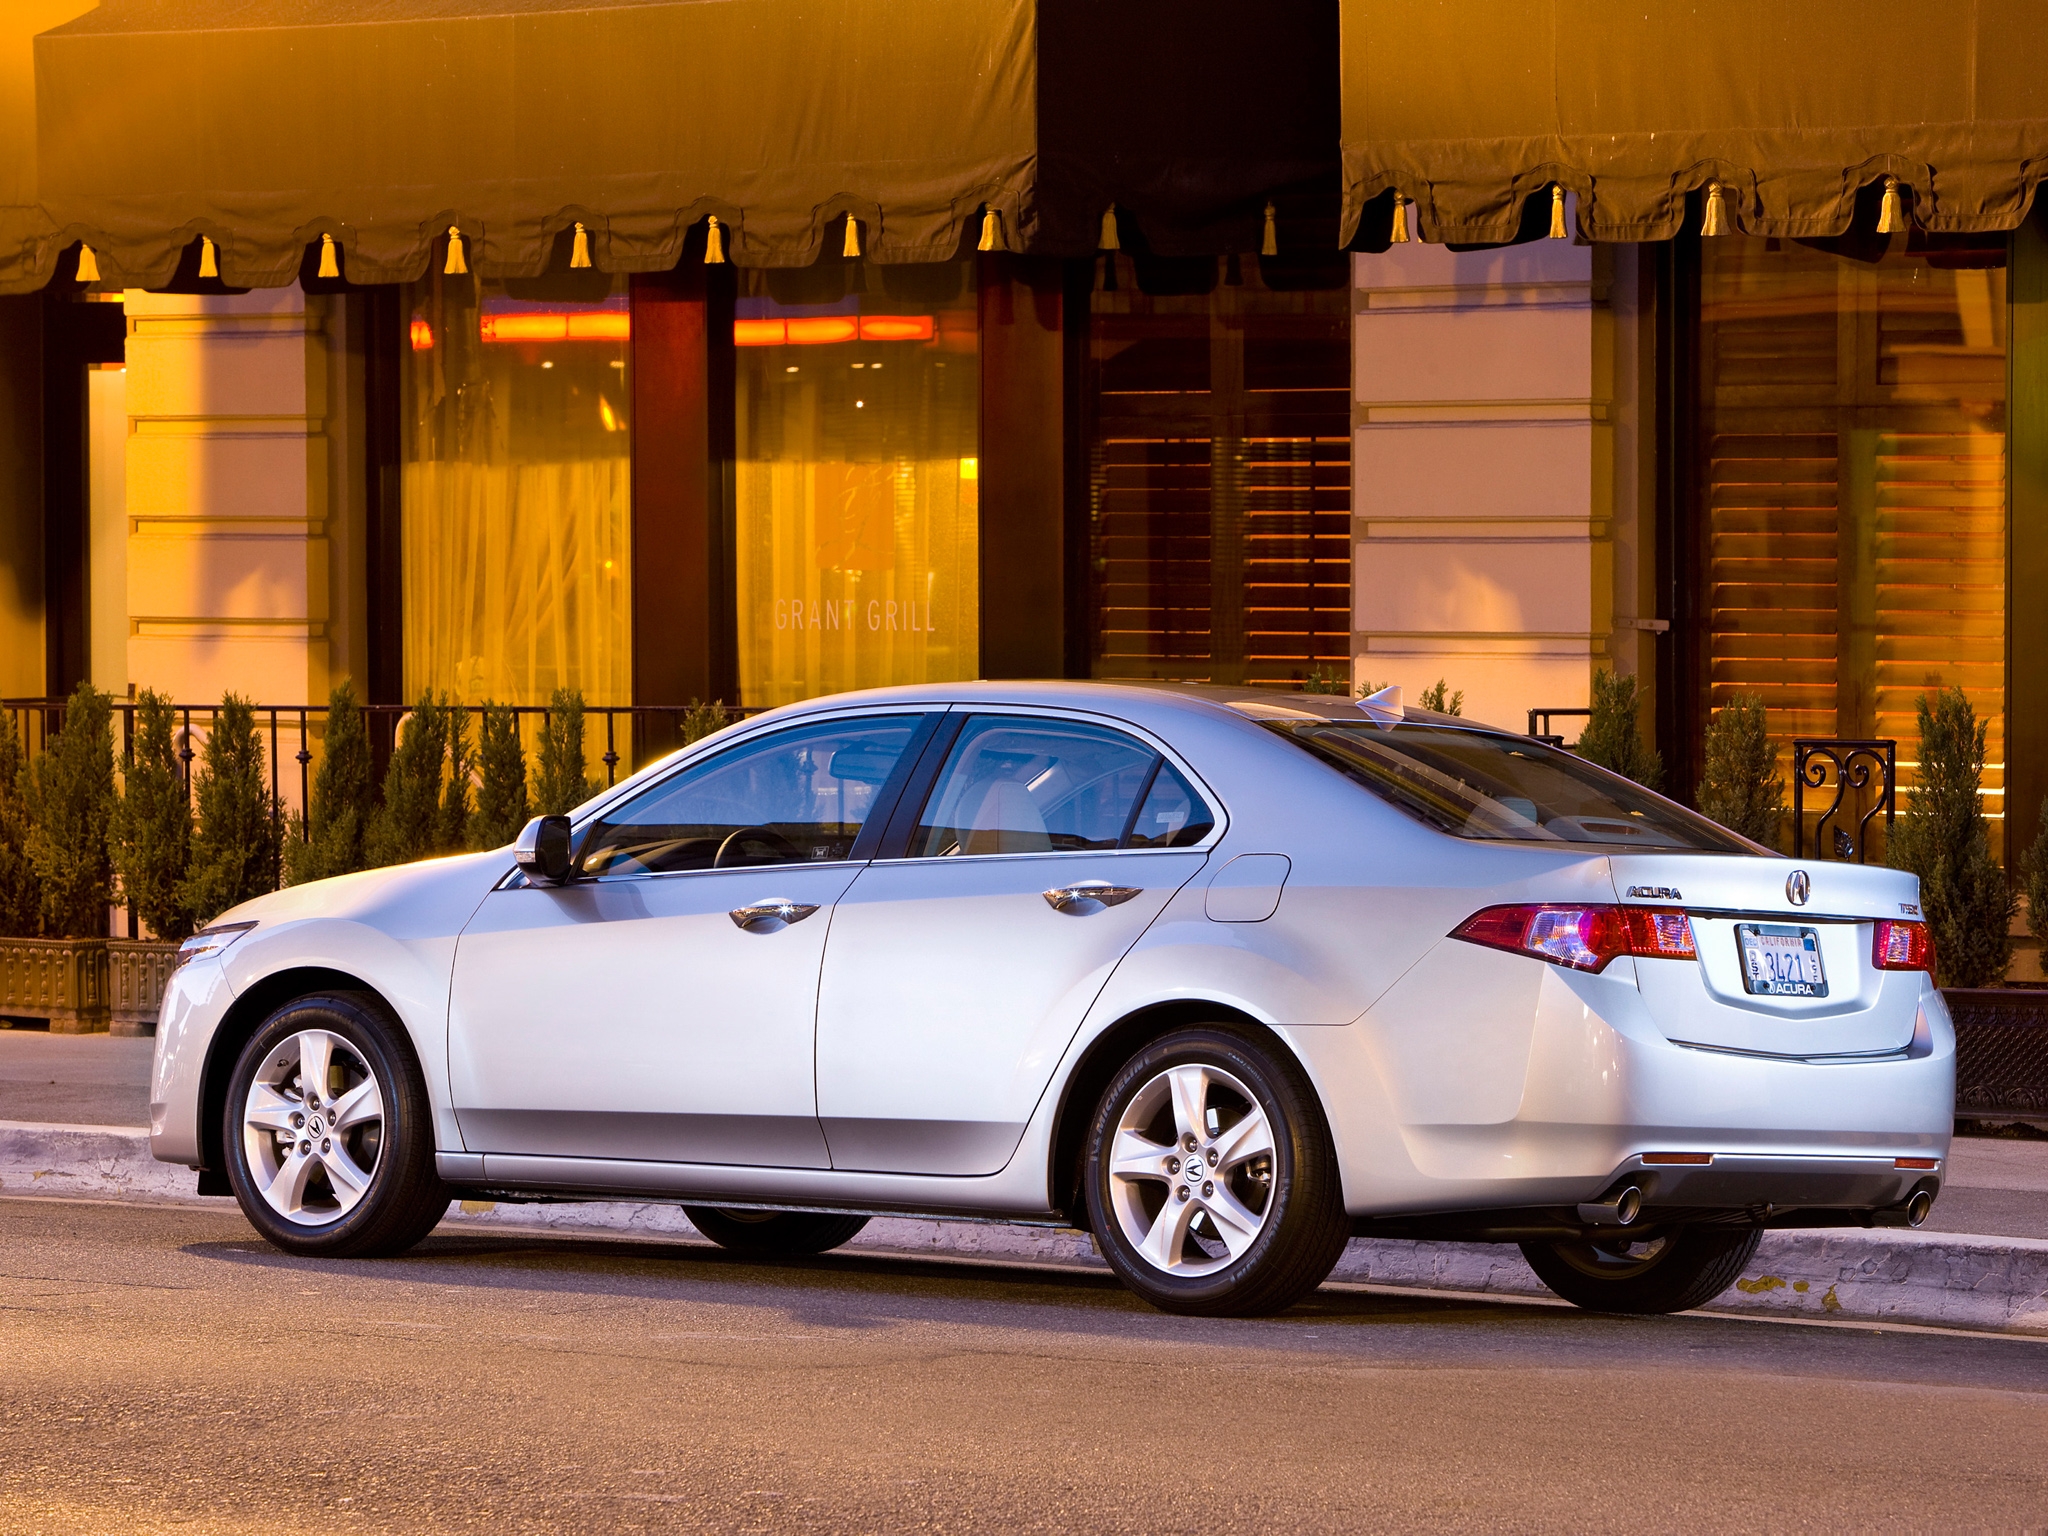 cars, auto, acura, building, asphalt, side view, style, akura, 2008, shrubs, street, silver metallic, tsx wallpapers for tablet